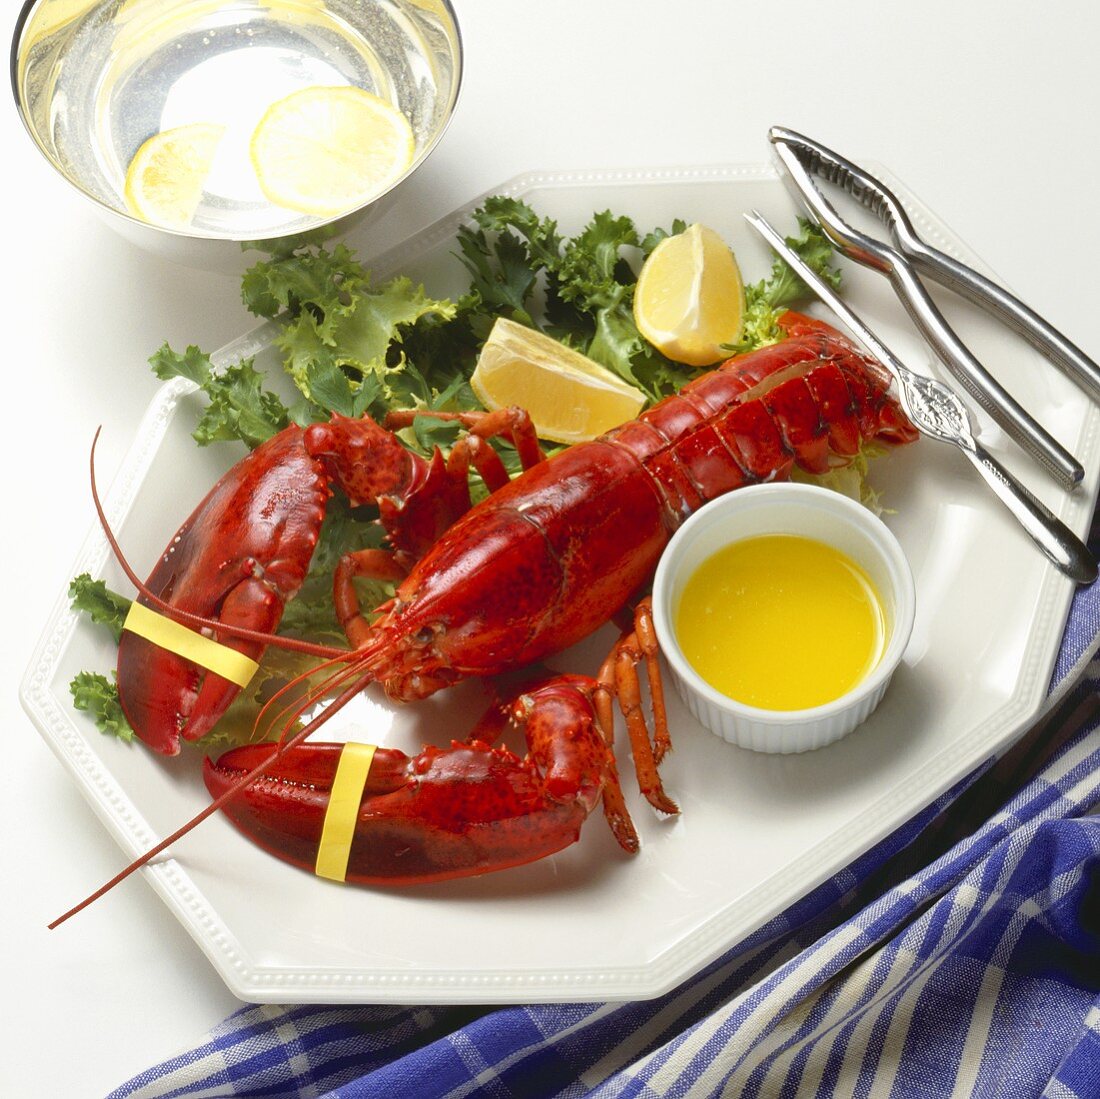 Steamed Lobster with Butter and Crackers